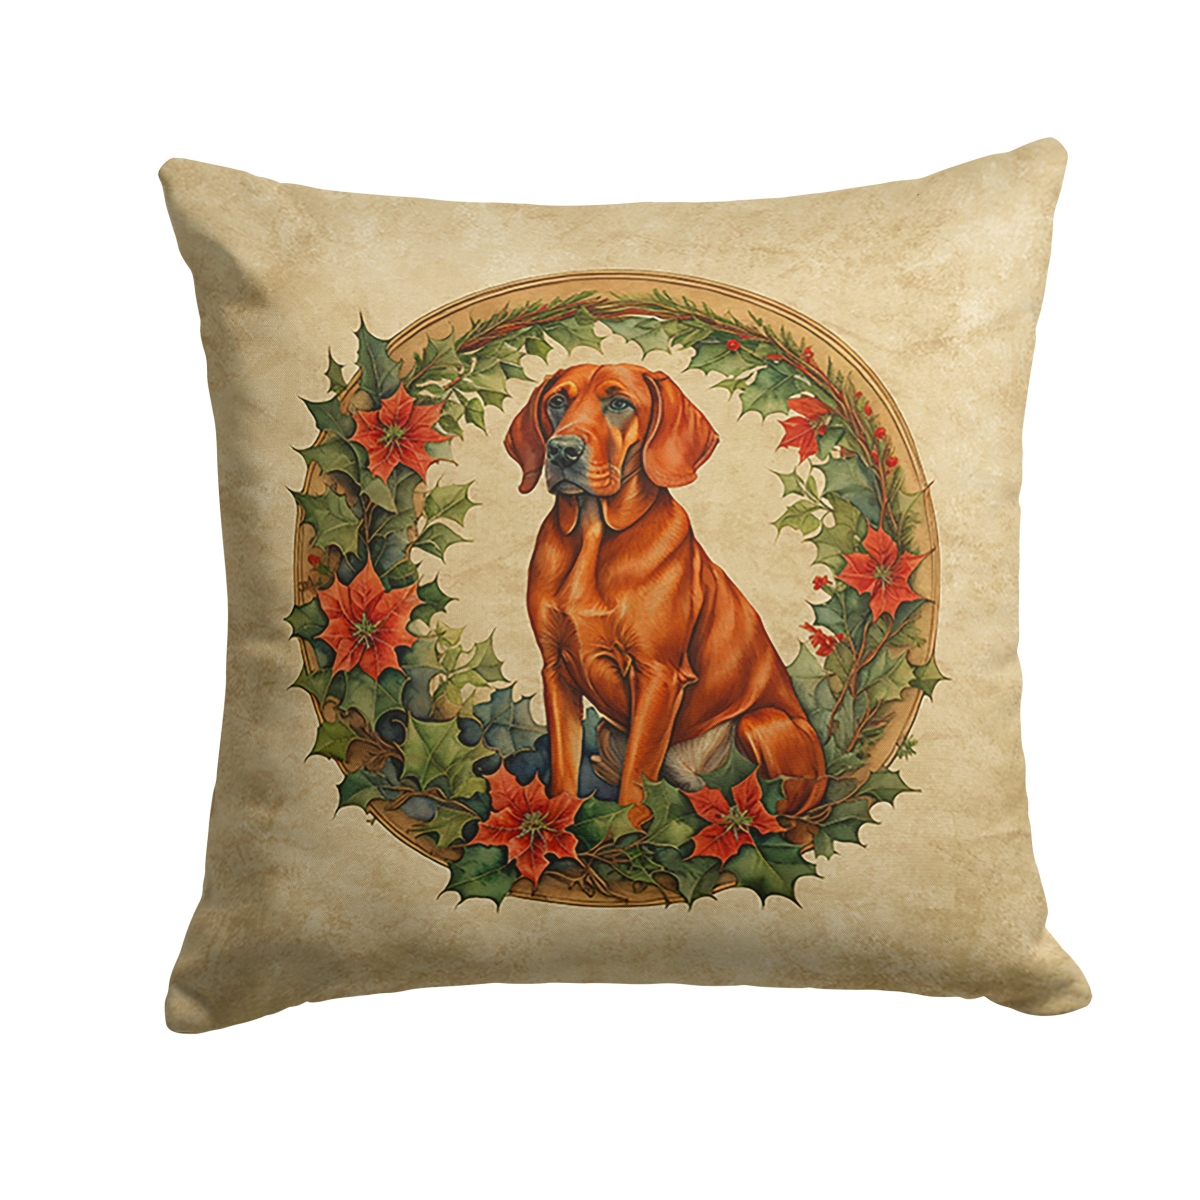 Caroline's Treasures DAC2417PW1414 14 x 14 in. Unisex Red Redbone Coonhound Christmas Flowers Polyester Fabric Throw Pillow